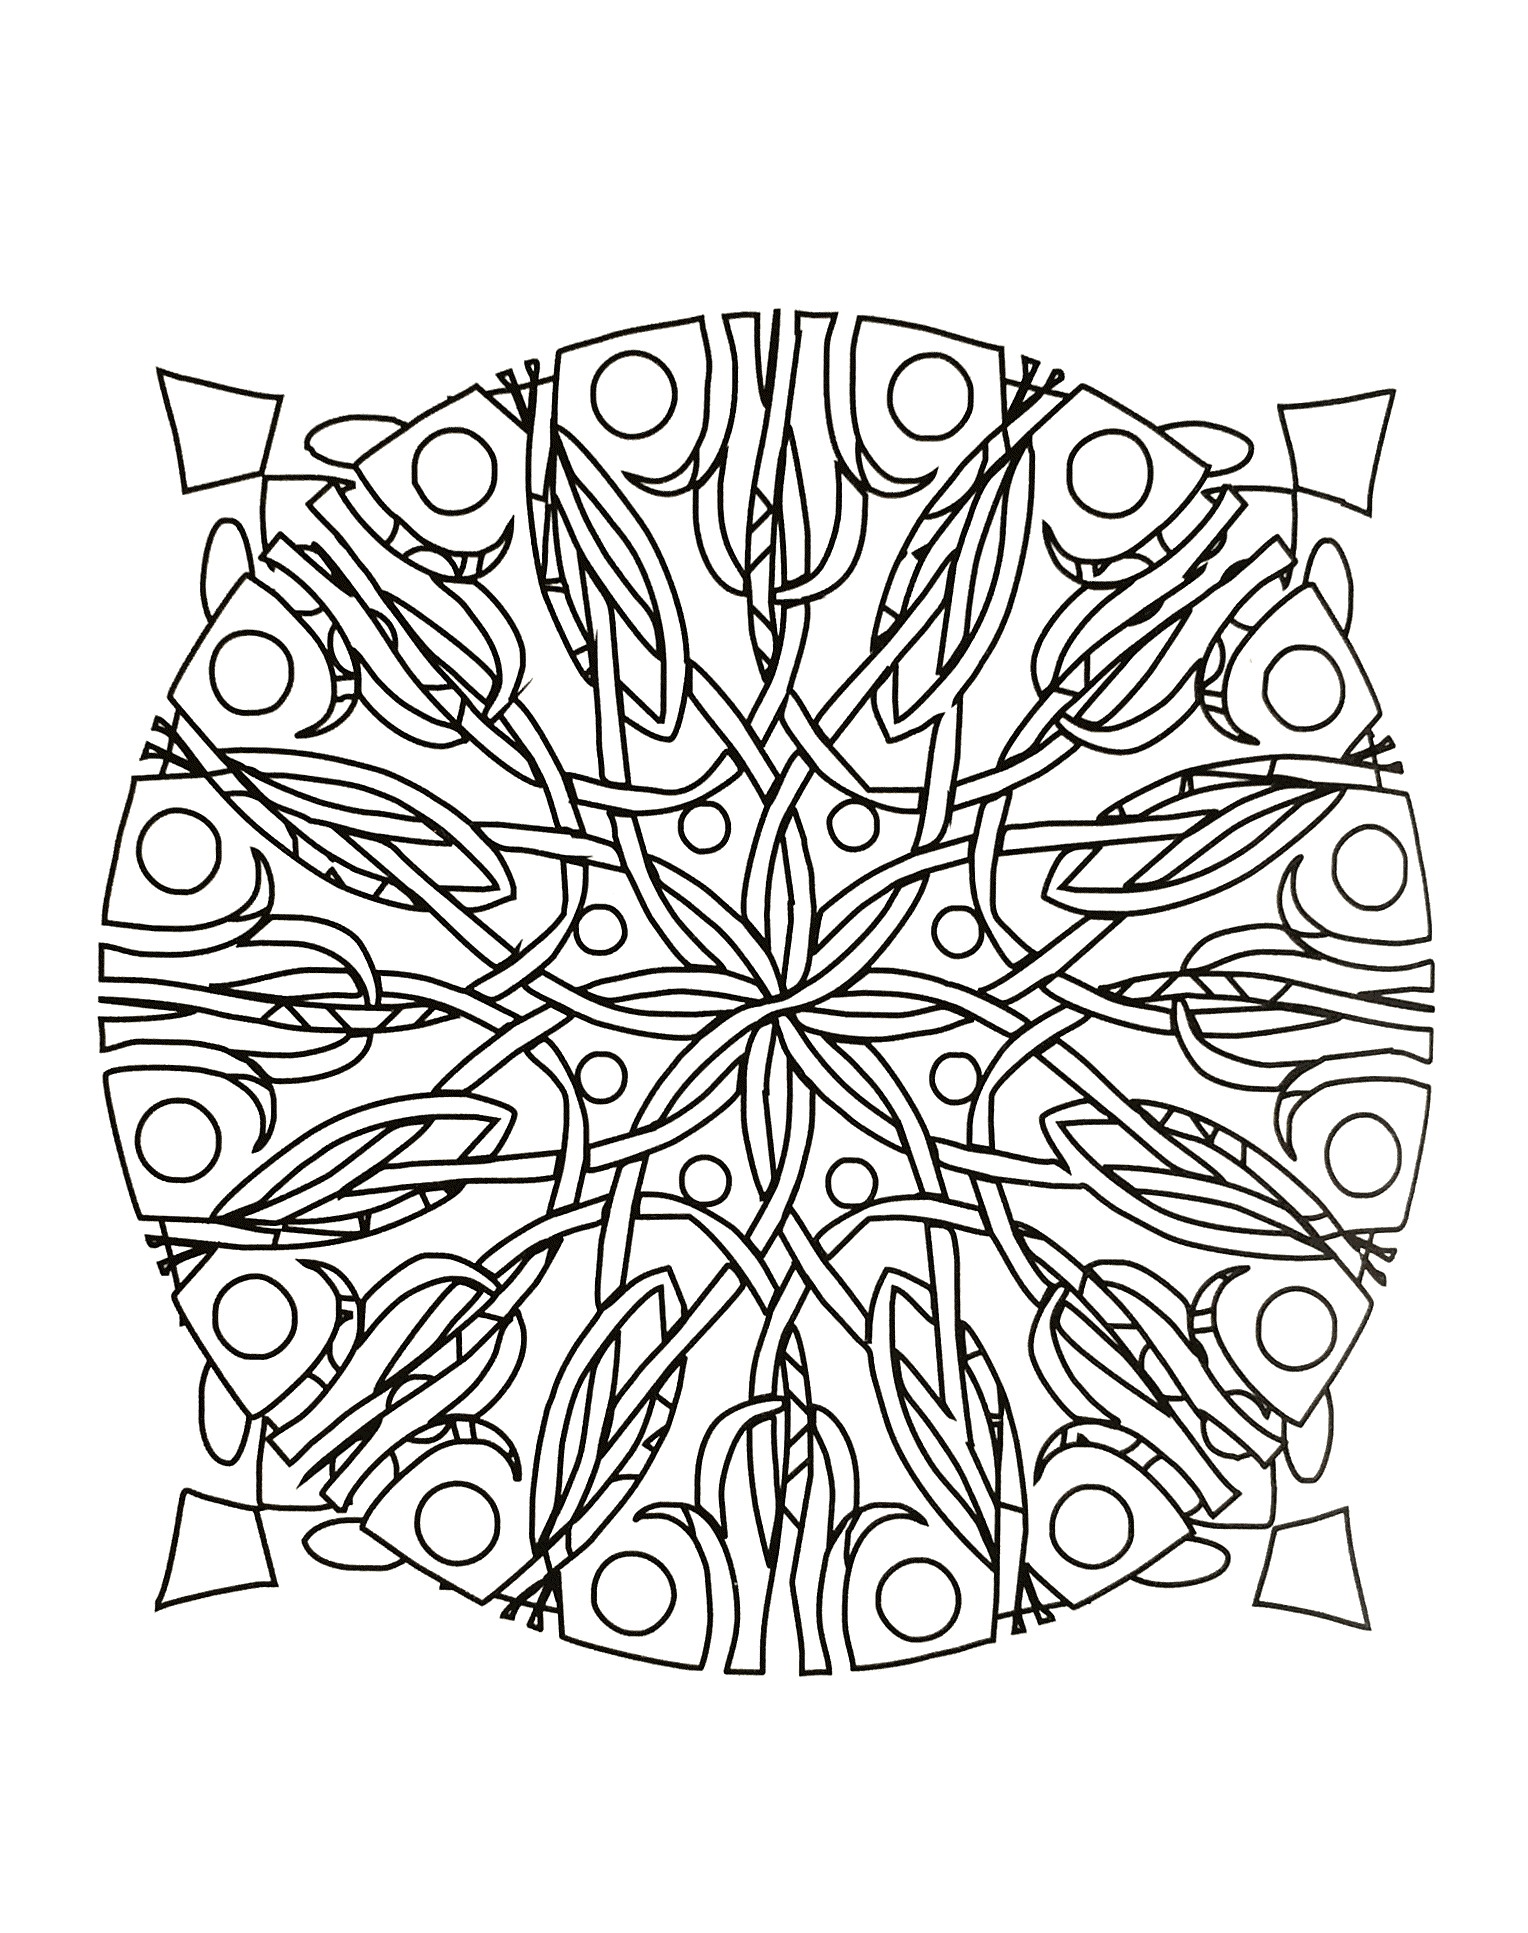 Prepare your pens and pencils to color this Mandala full of small details and intricate areas. This one is special : it's not regular ! Feel free to let your instincts decide where to color, and what colors to choose.